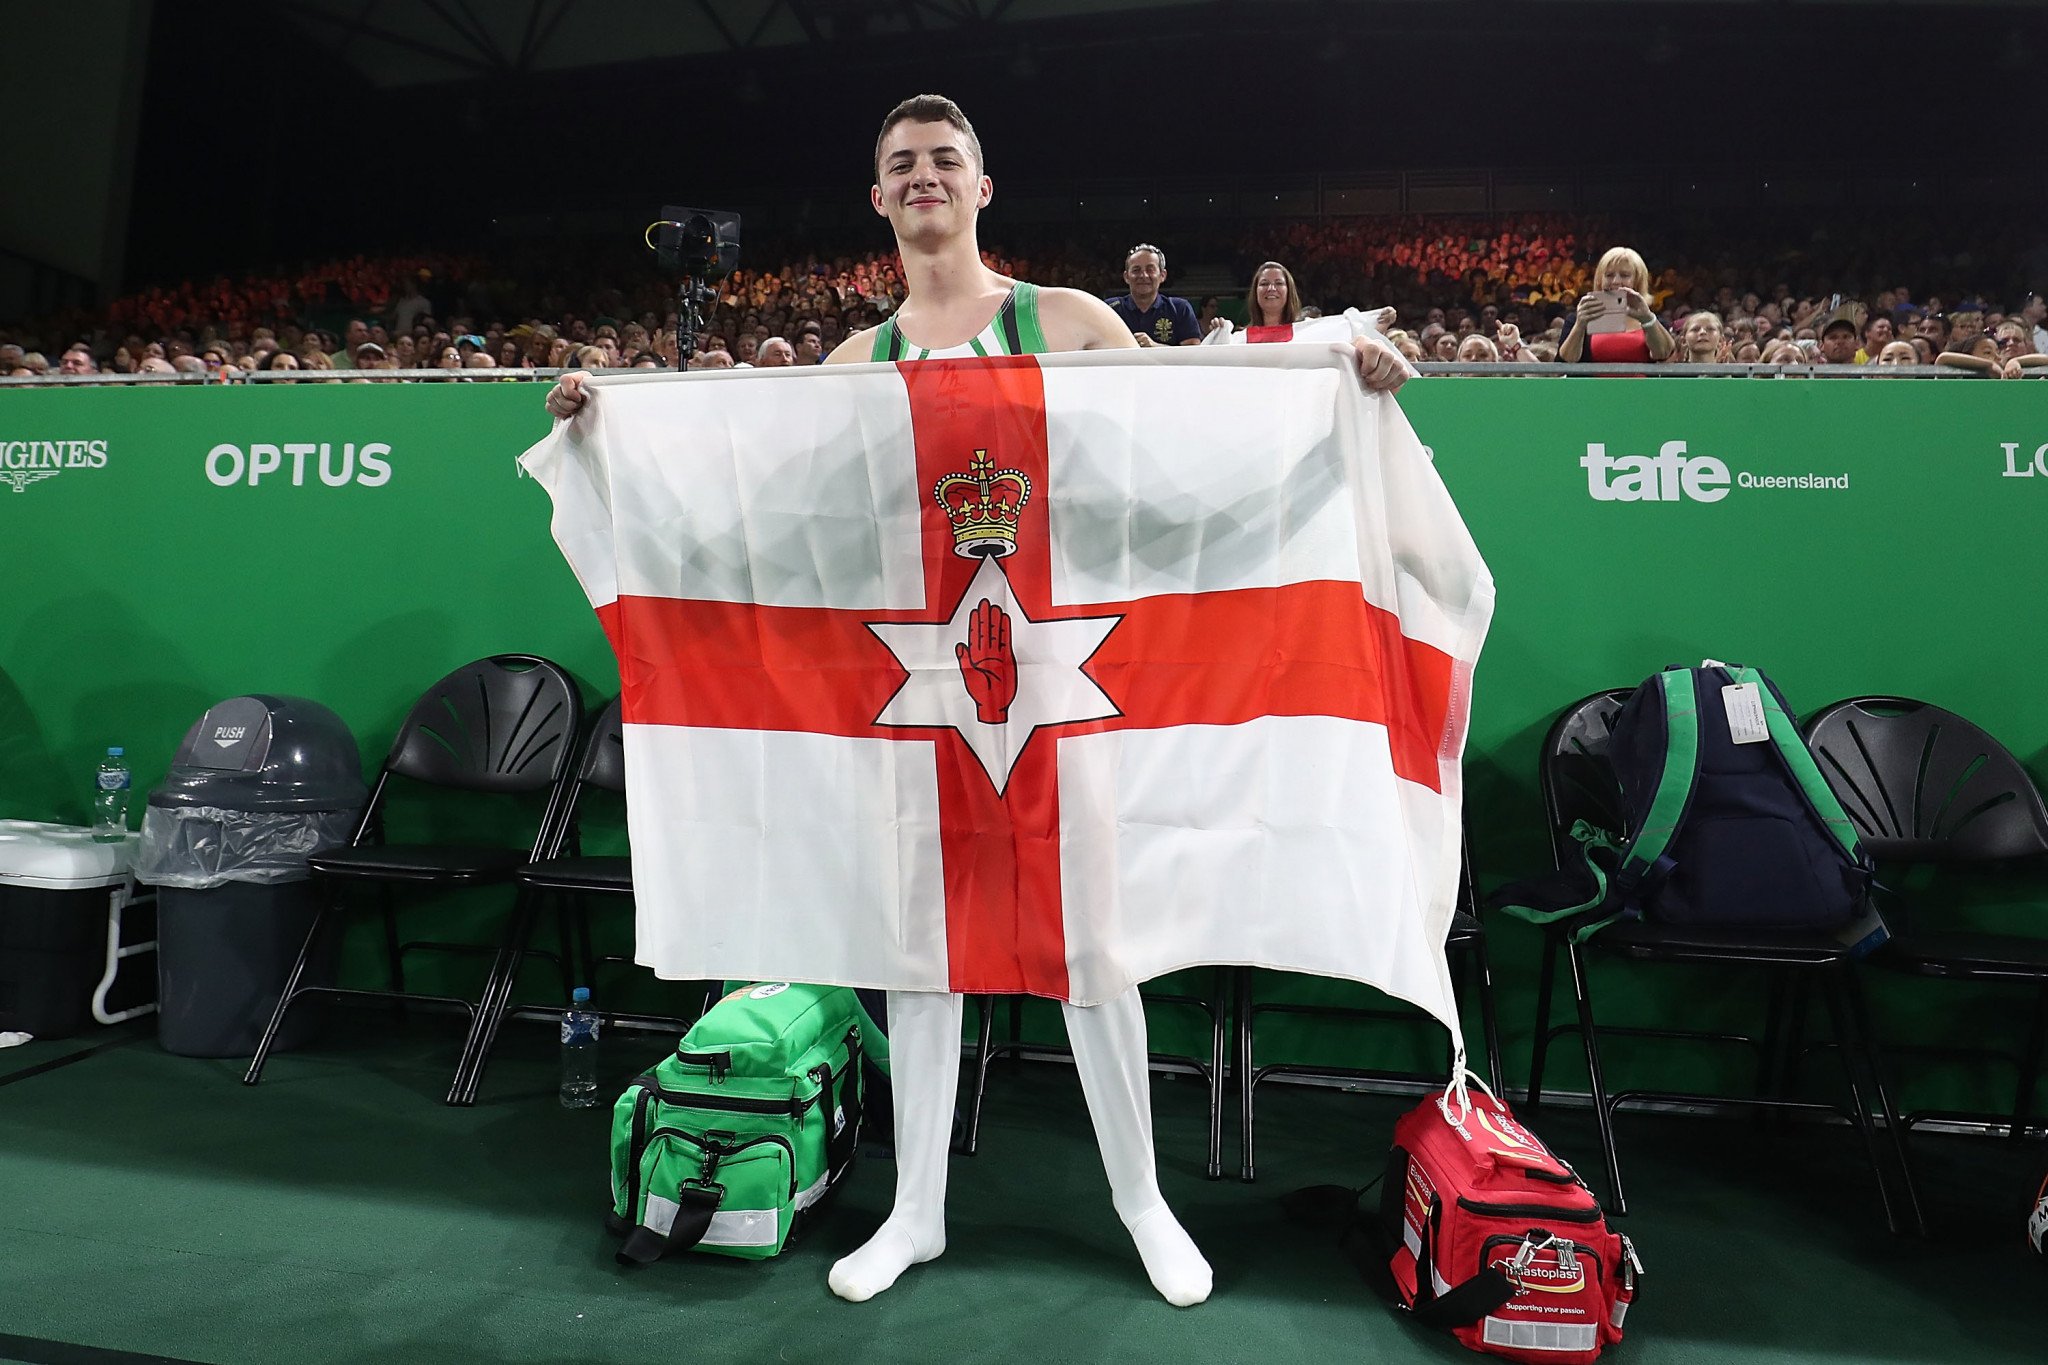 Gymnast Rhys McClenaghan won Northern Ireland's only gold medal at Rio 2016 ©Getty Images